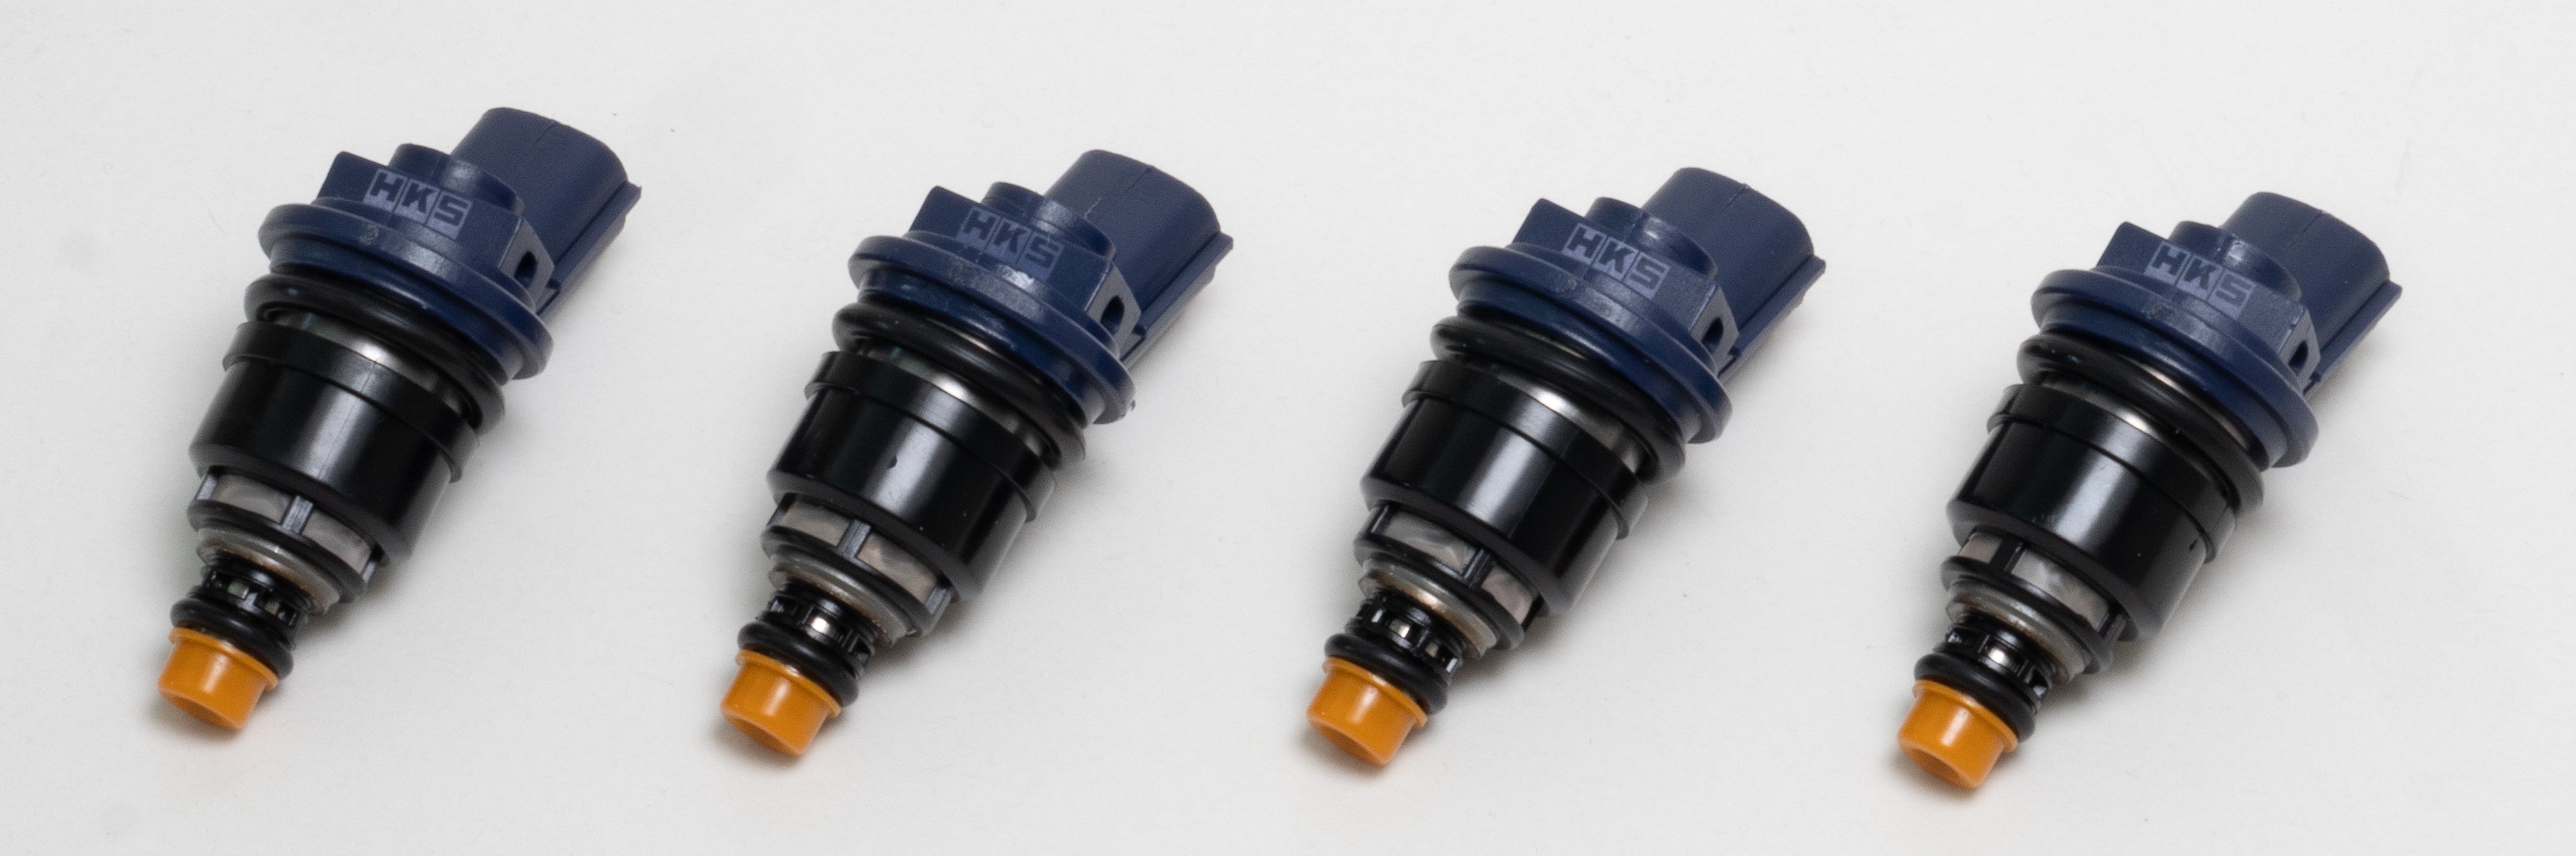 HKS 14002-AN004 Injector Upgrade Kit for NISSAN Silva (S14/S15) Photo-0 